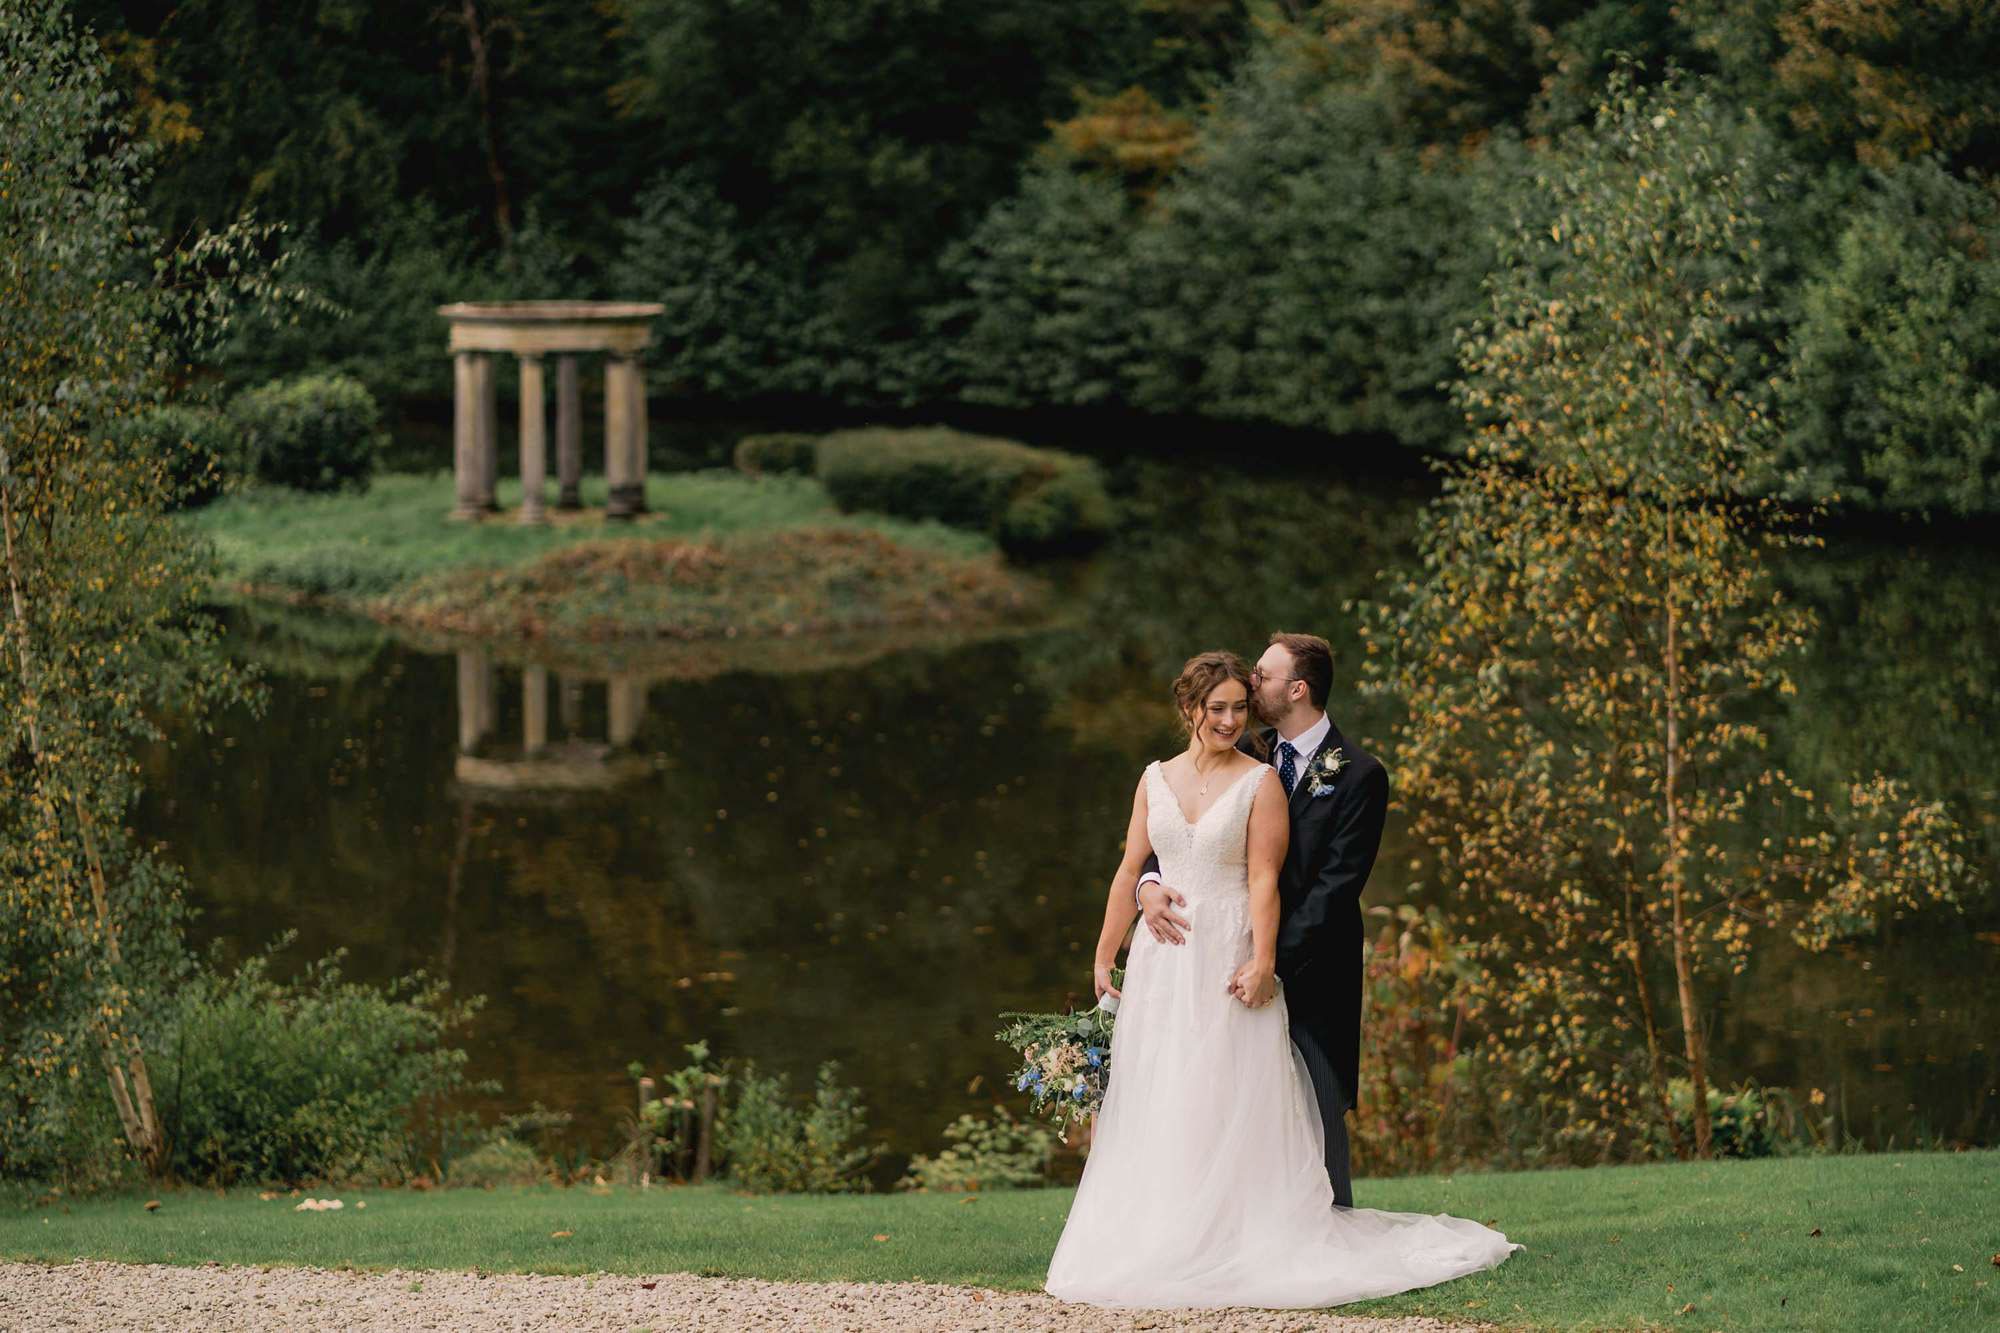 Bride and groom hug closely in front of the lake on their wedding day at Salomons Estate in Tunbridge Wells.